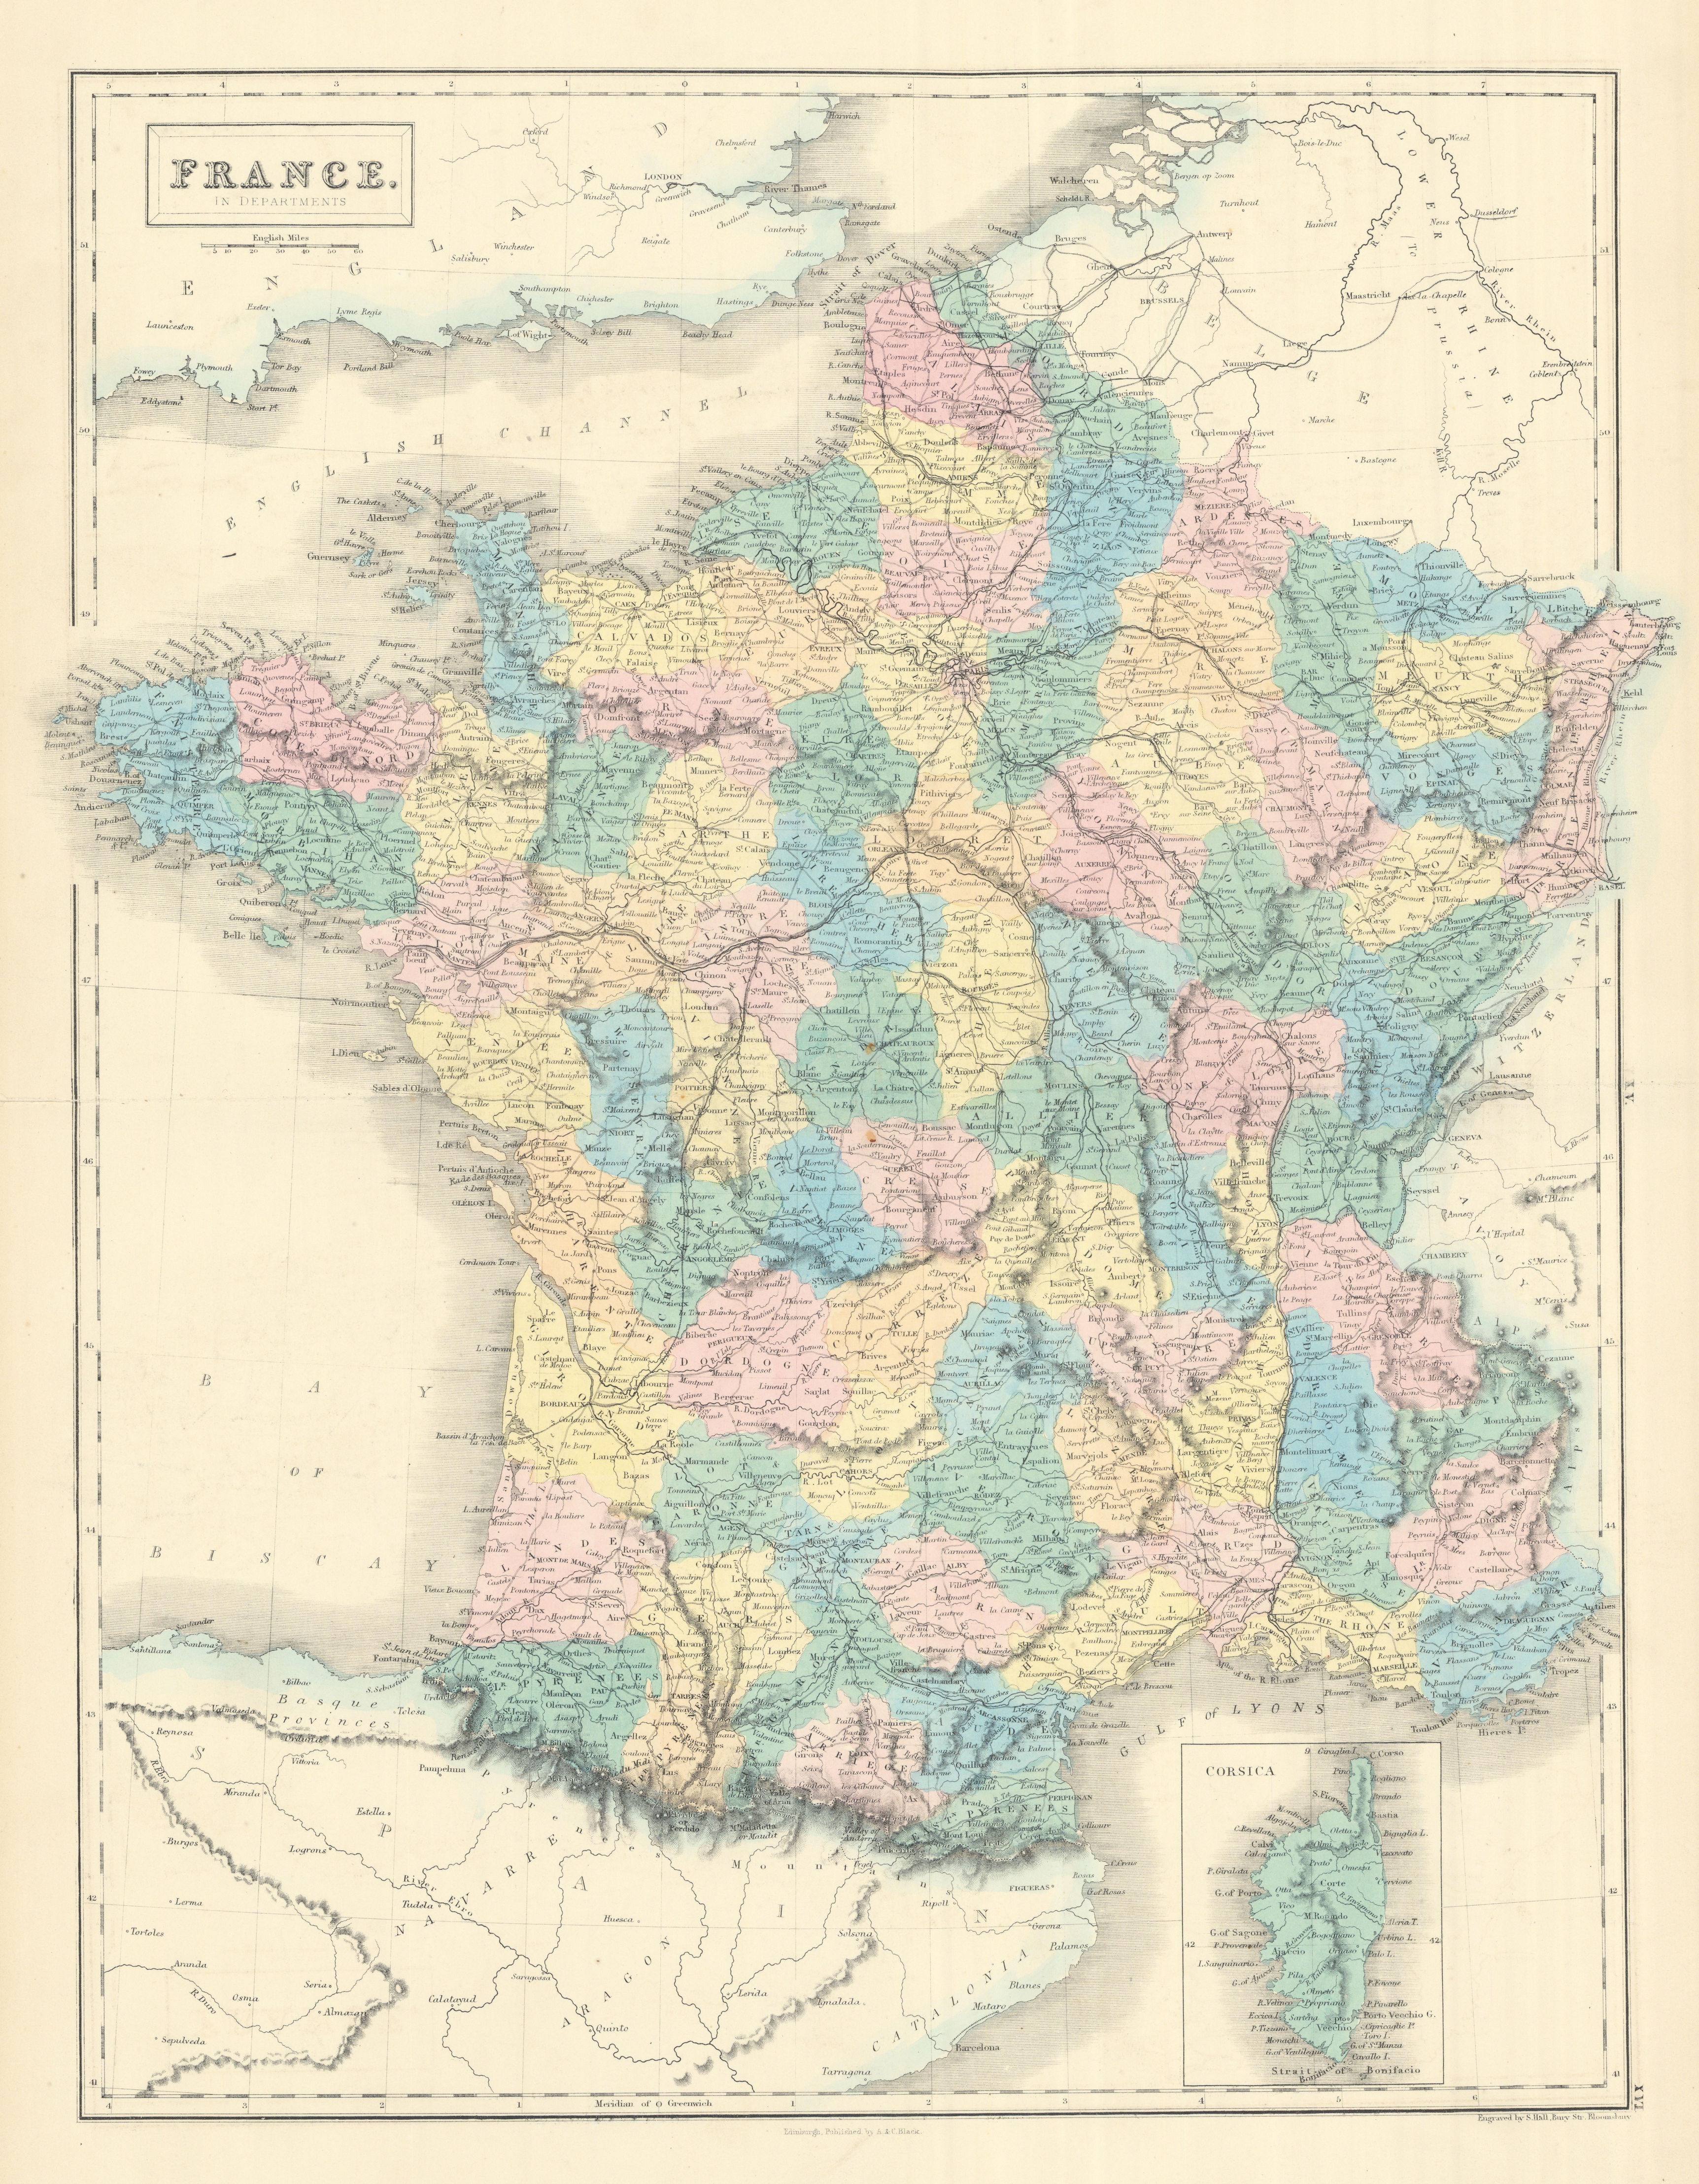 Associate Product France in departments showing railways. SIDNEY HALL 1854 old antique map chart